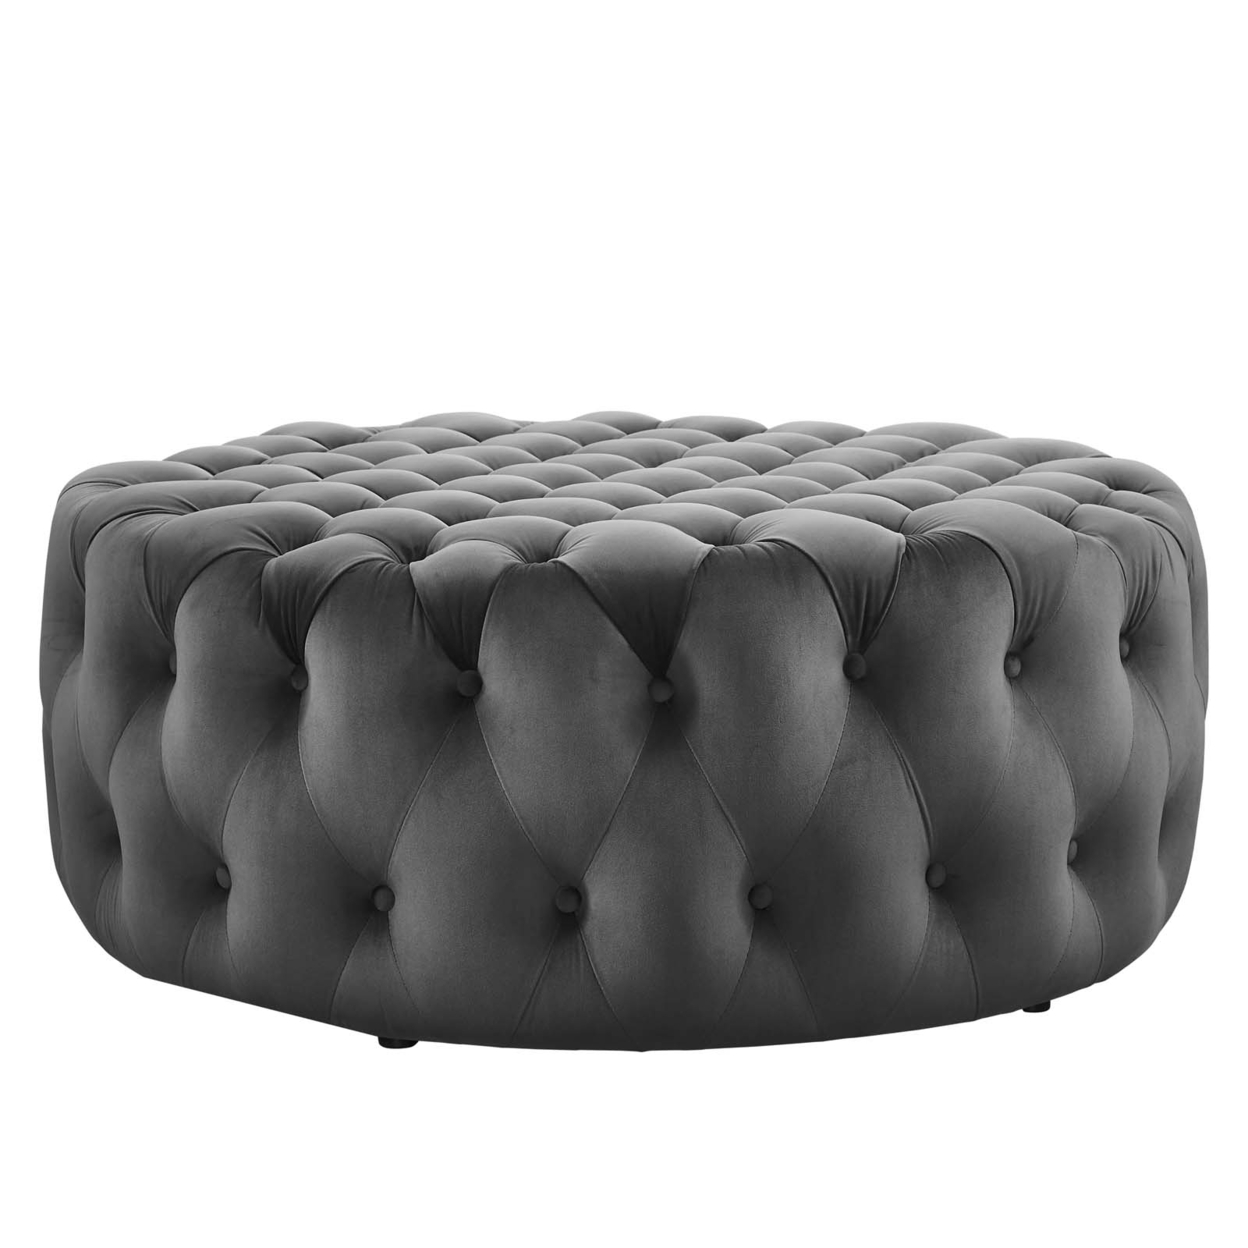 Amour Tufted Button Large Round Performance Velvet Ottoman, Gray